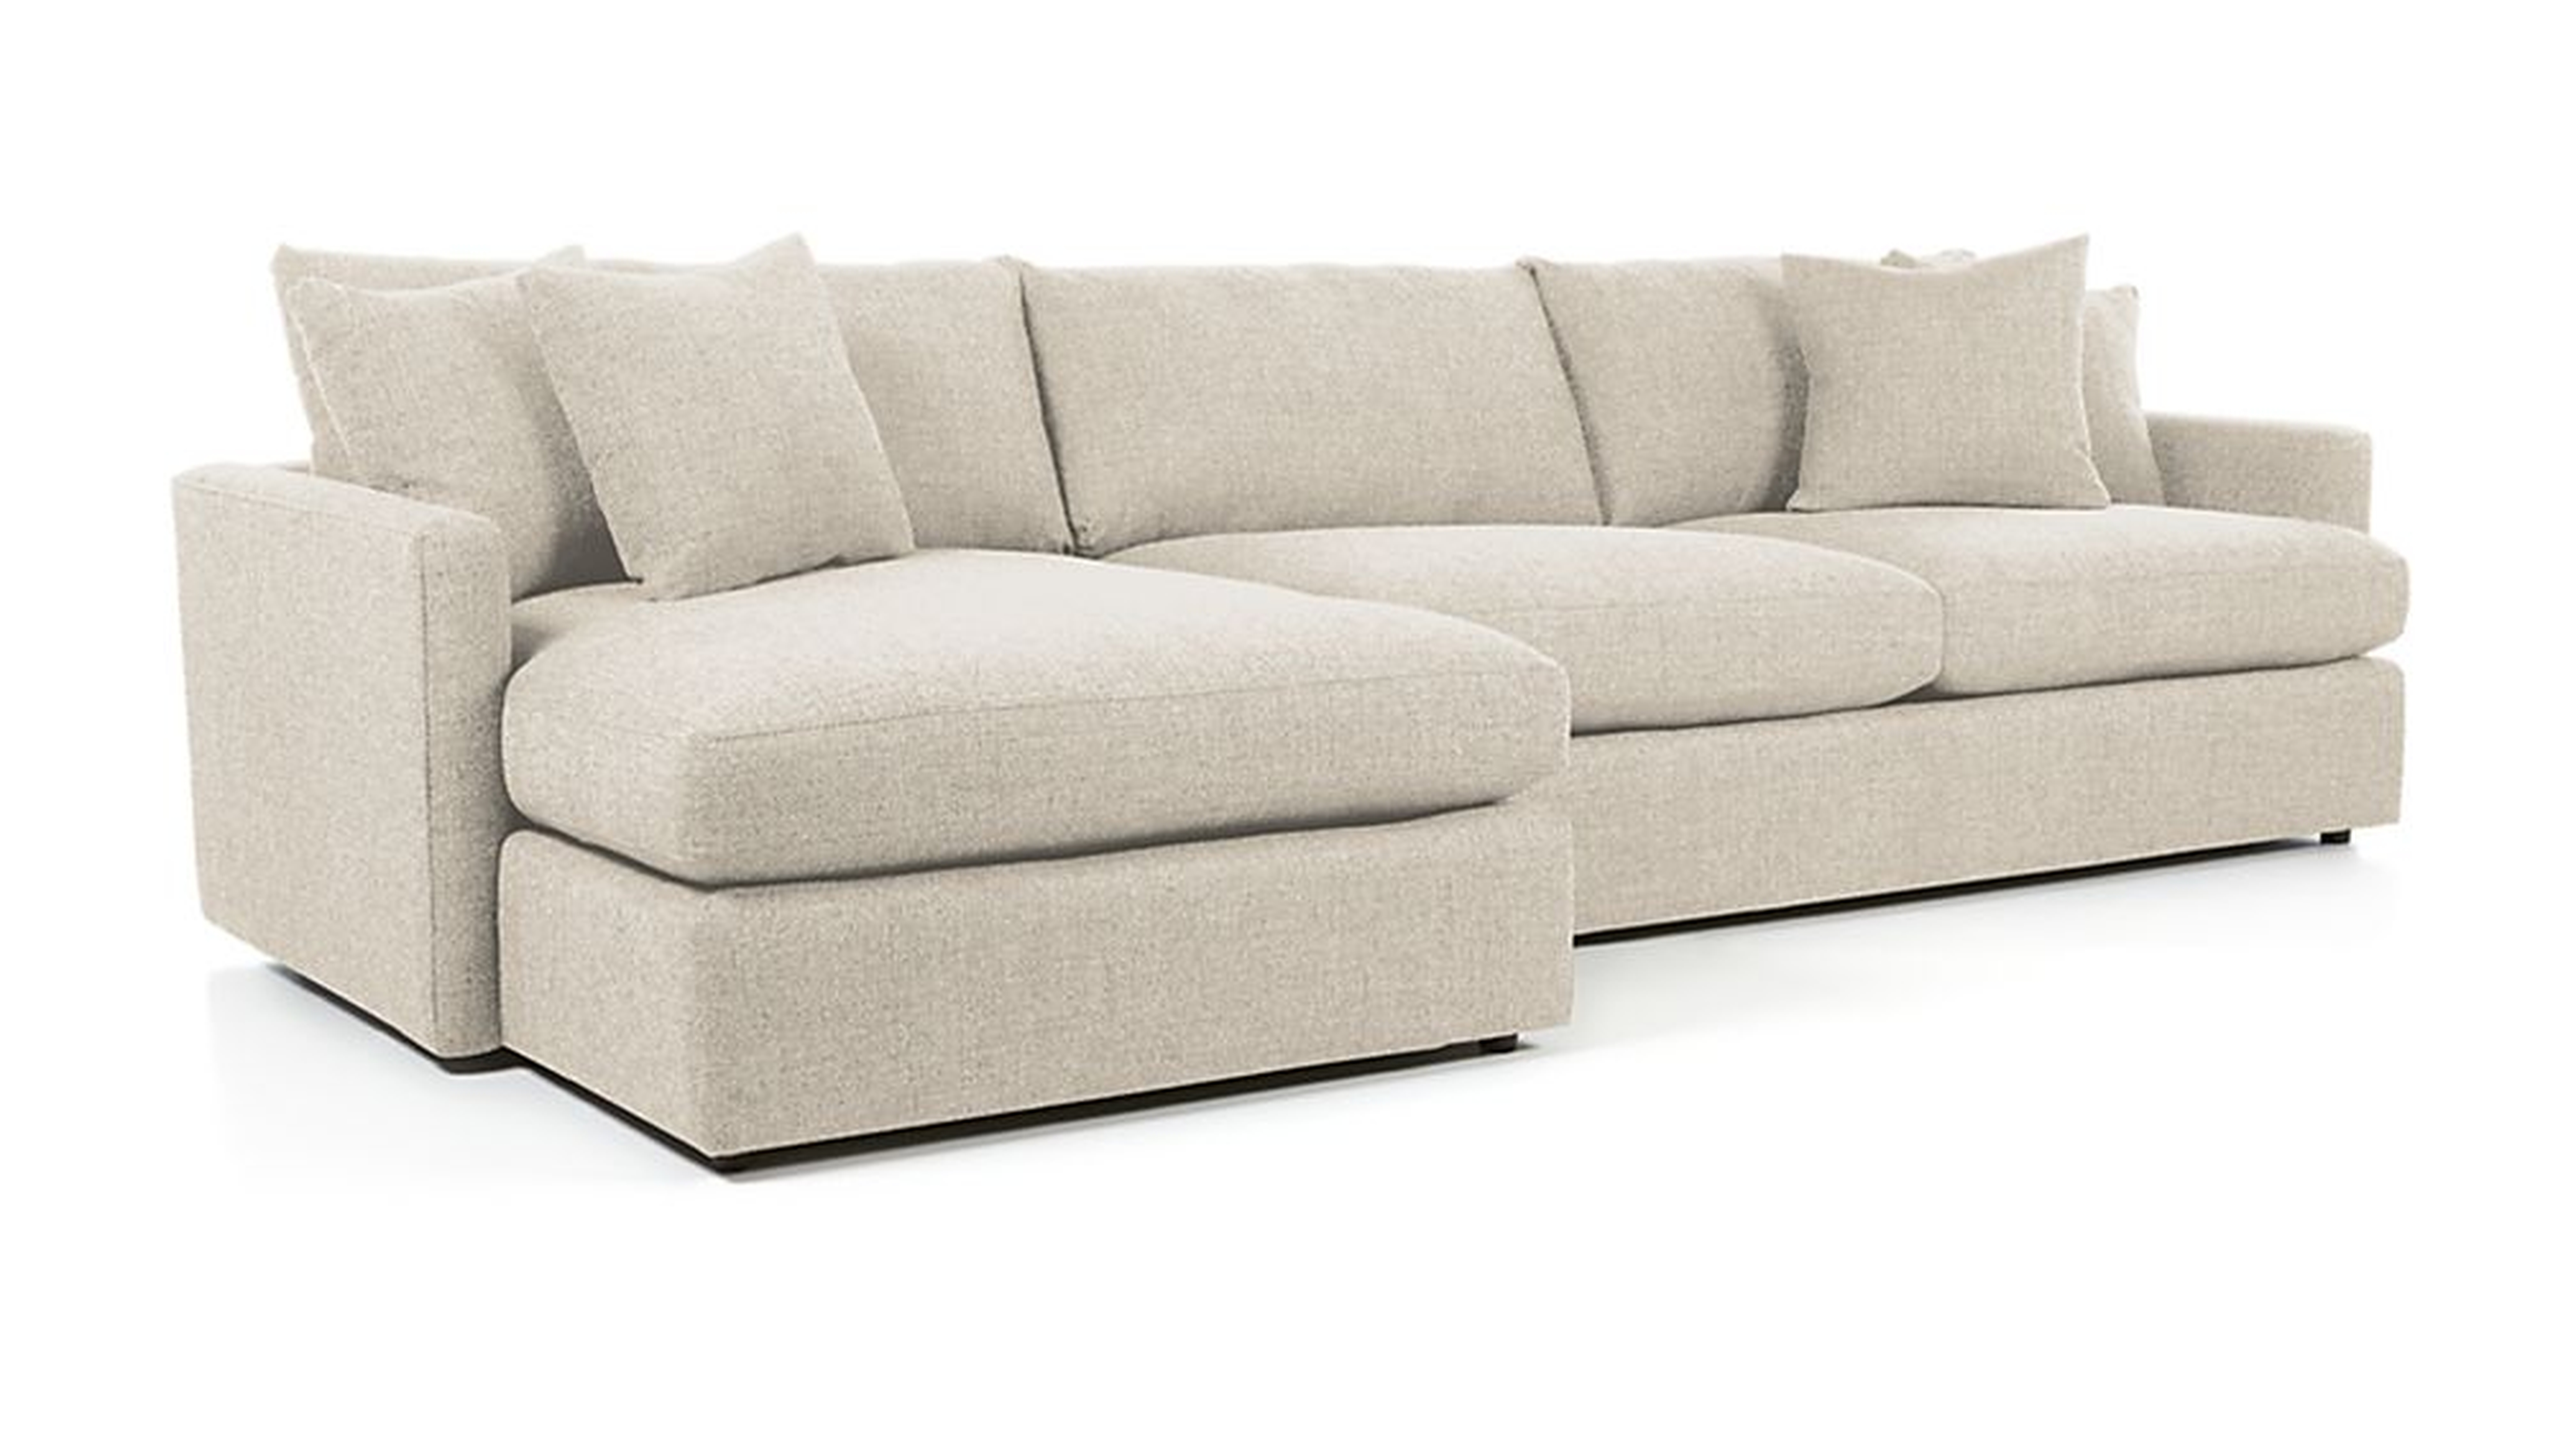 Lounge II 2-Piece Sectional Sofa - PEARL - Crate and Barrel